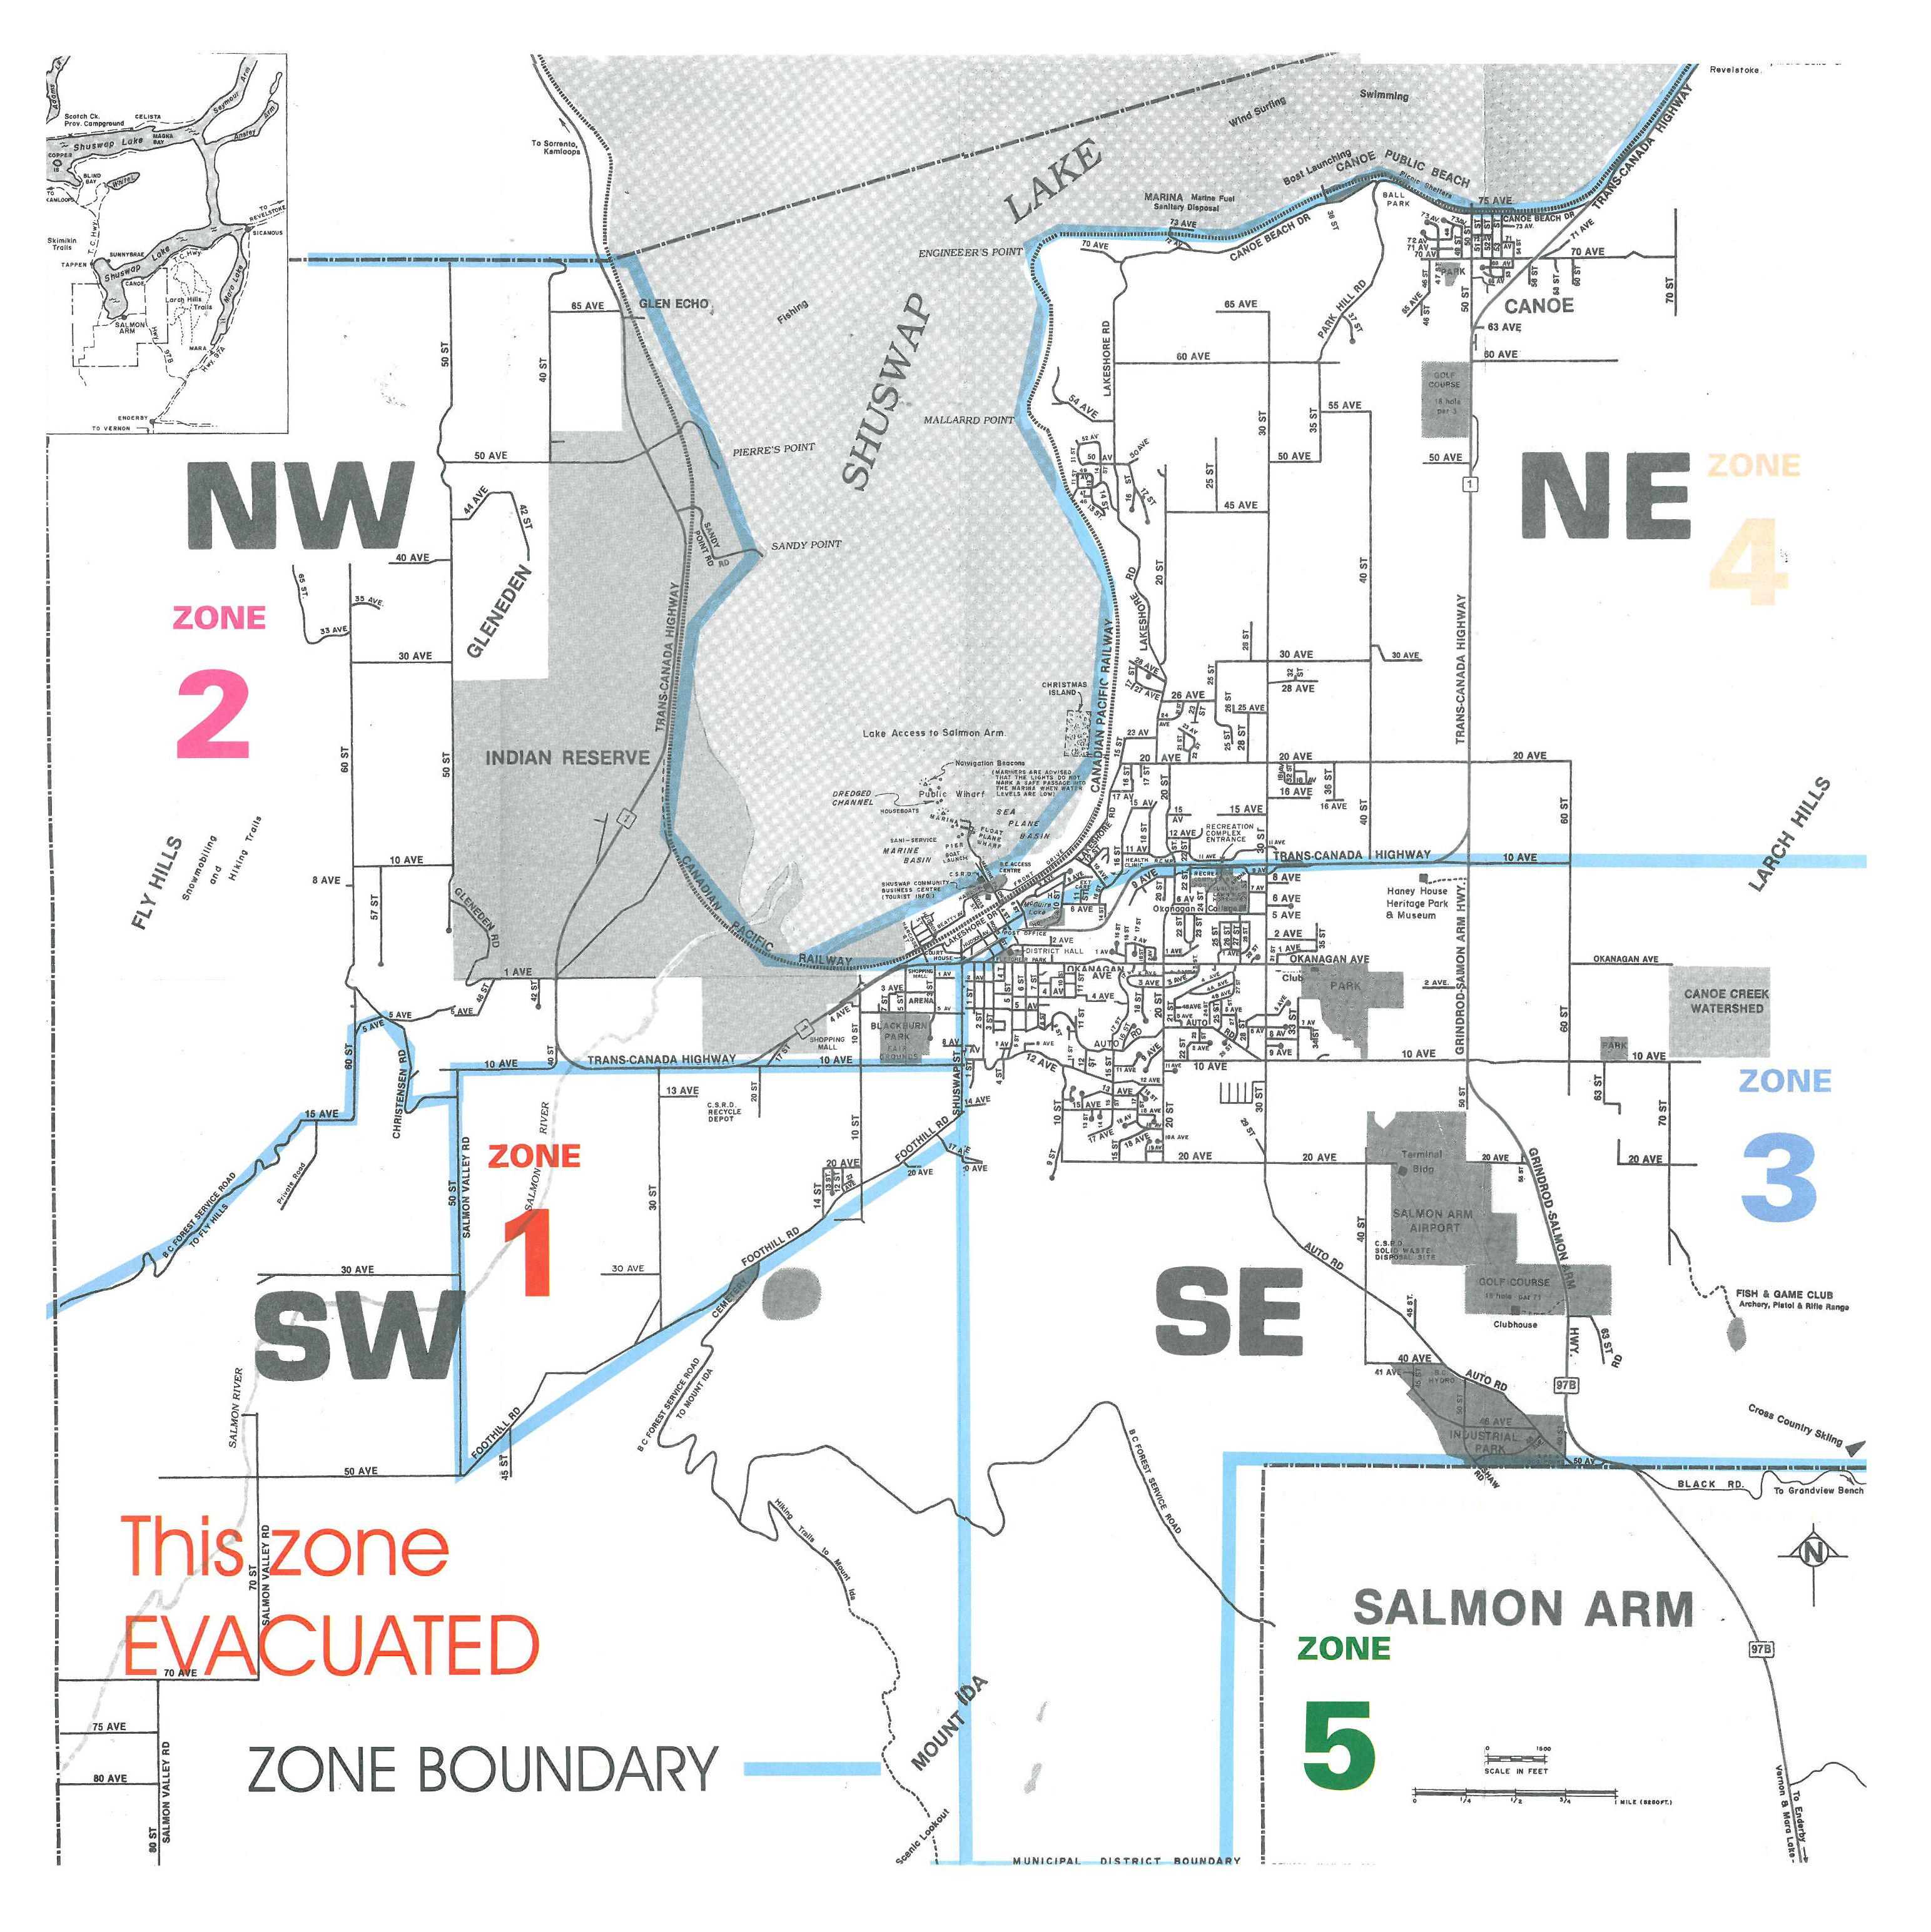 This is the Salmon Arm evacuation map that was issued during the Fire of 1998. The community was divided into 5 zones. Zone 1 bordered Fly Hills and was south west of Salmon Arm. The Silver Creek Fire burned out of control in Zone 1, destroying many houses. North of Zone 1 was Zone 2, which also bordered on Fly Hills, but it was not evacuated. Zone 3 was east of Zone 1, heavily populated and threatened by the fire. Zones 4 and 5 sandwiched Zone 3 - north and south of Zone 3. They were not evacuated.